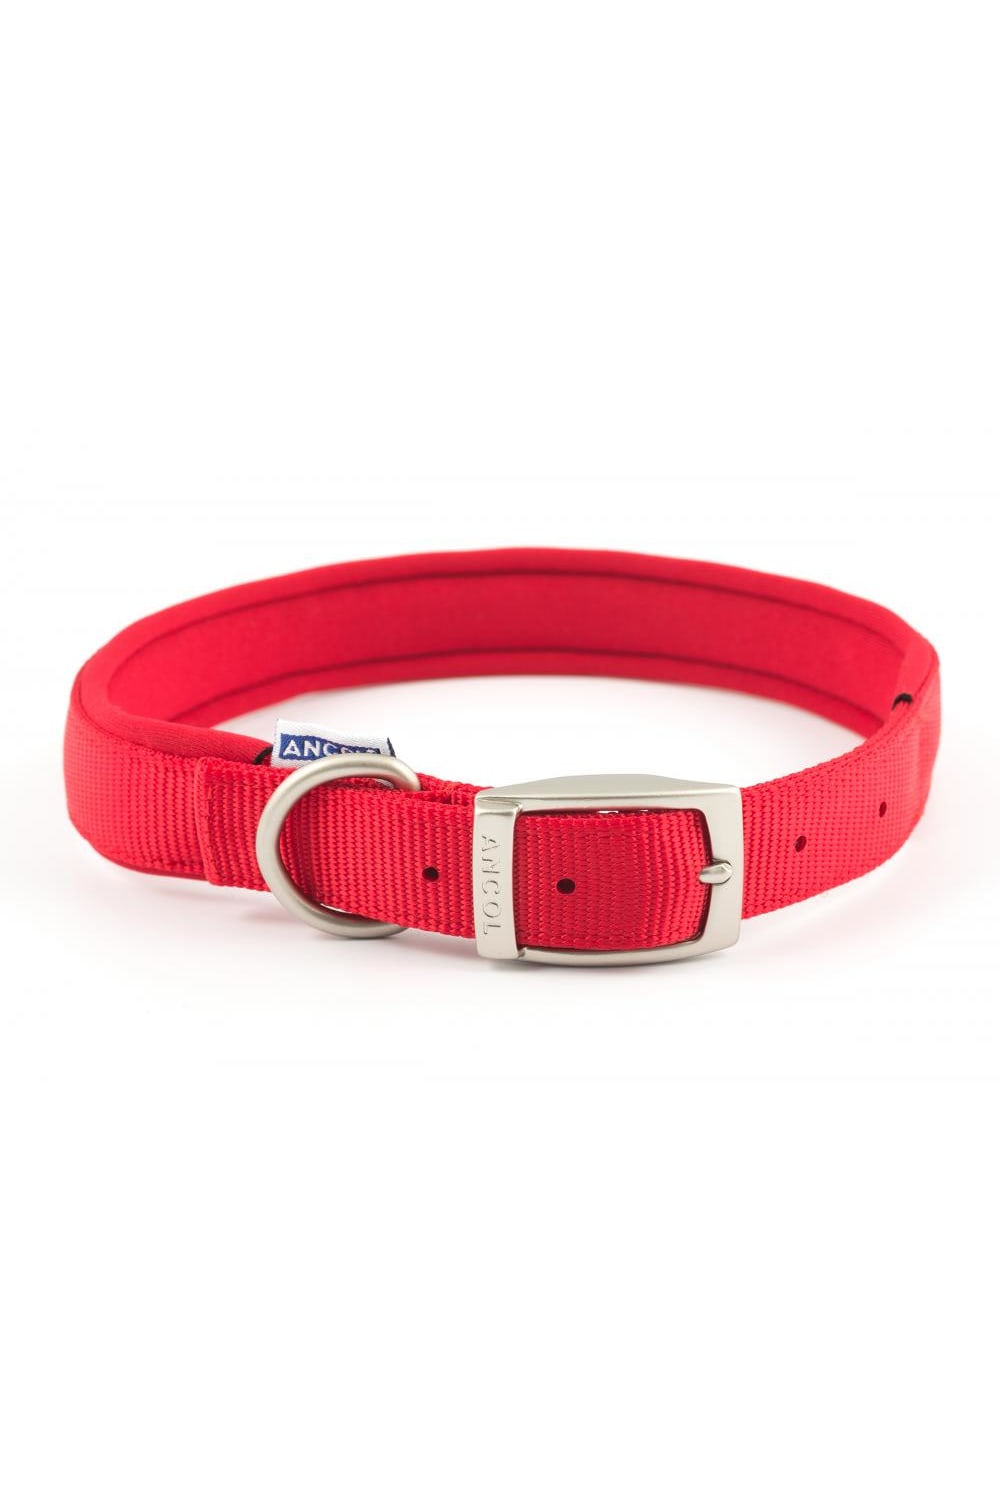 Ancol Air Hold Dog Collar (Red) (18 Inch)